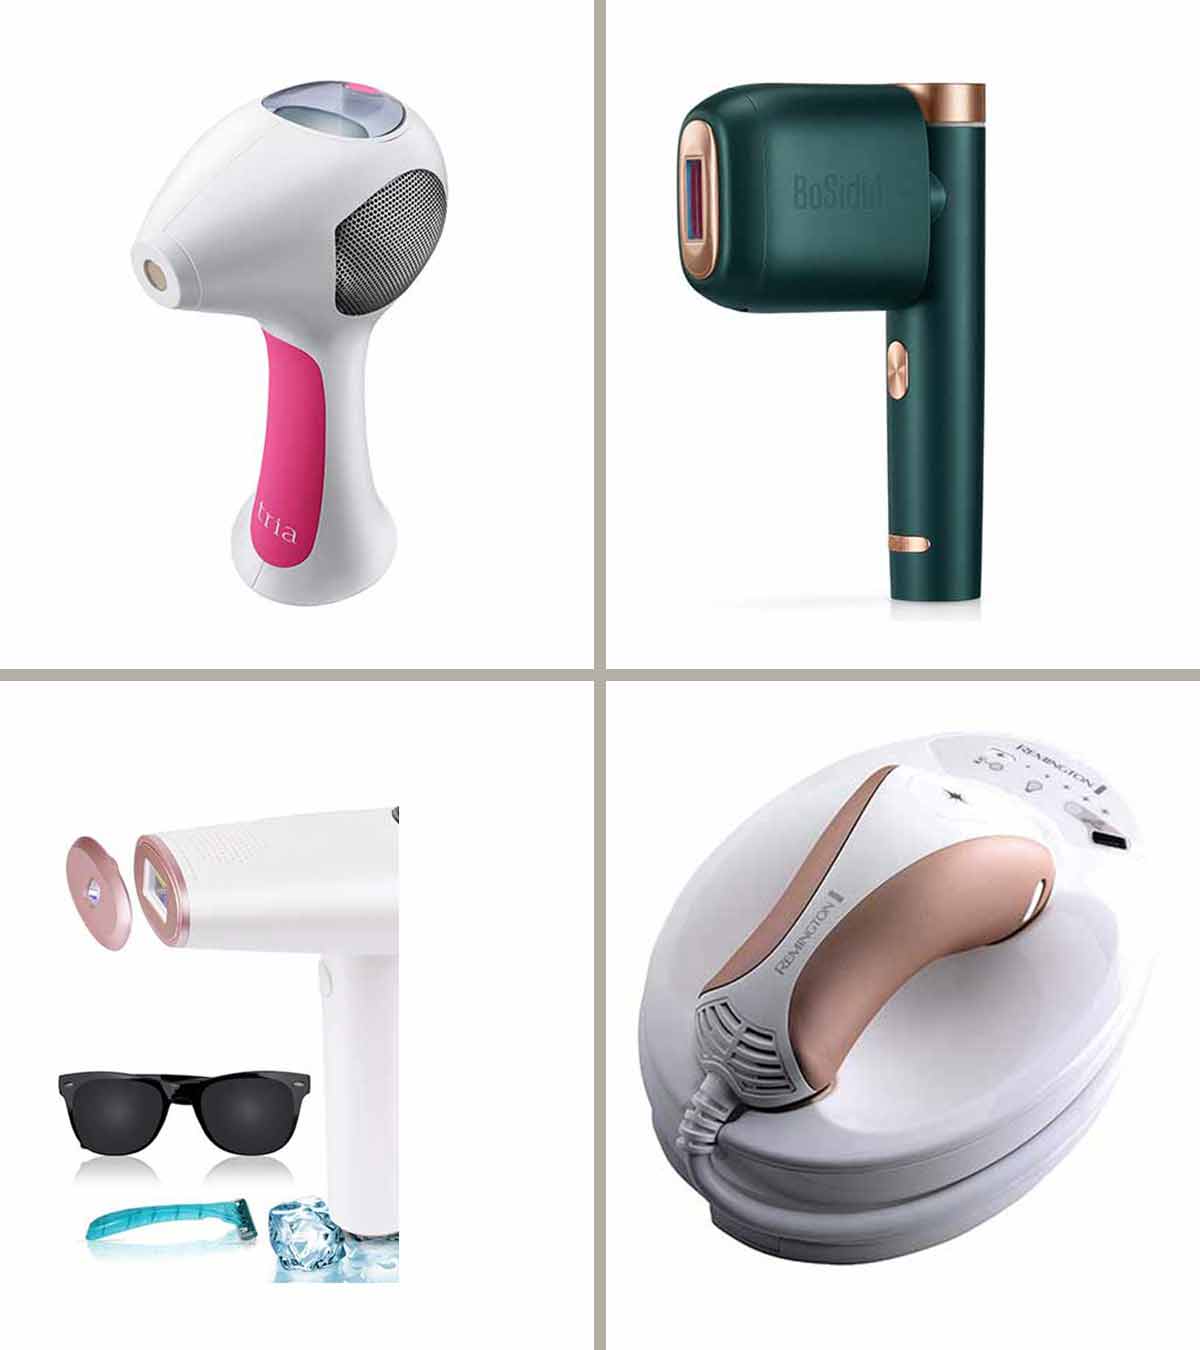 15 Best IPL Home Laser Hair Removal Devices, Dermatologist-Reviewed